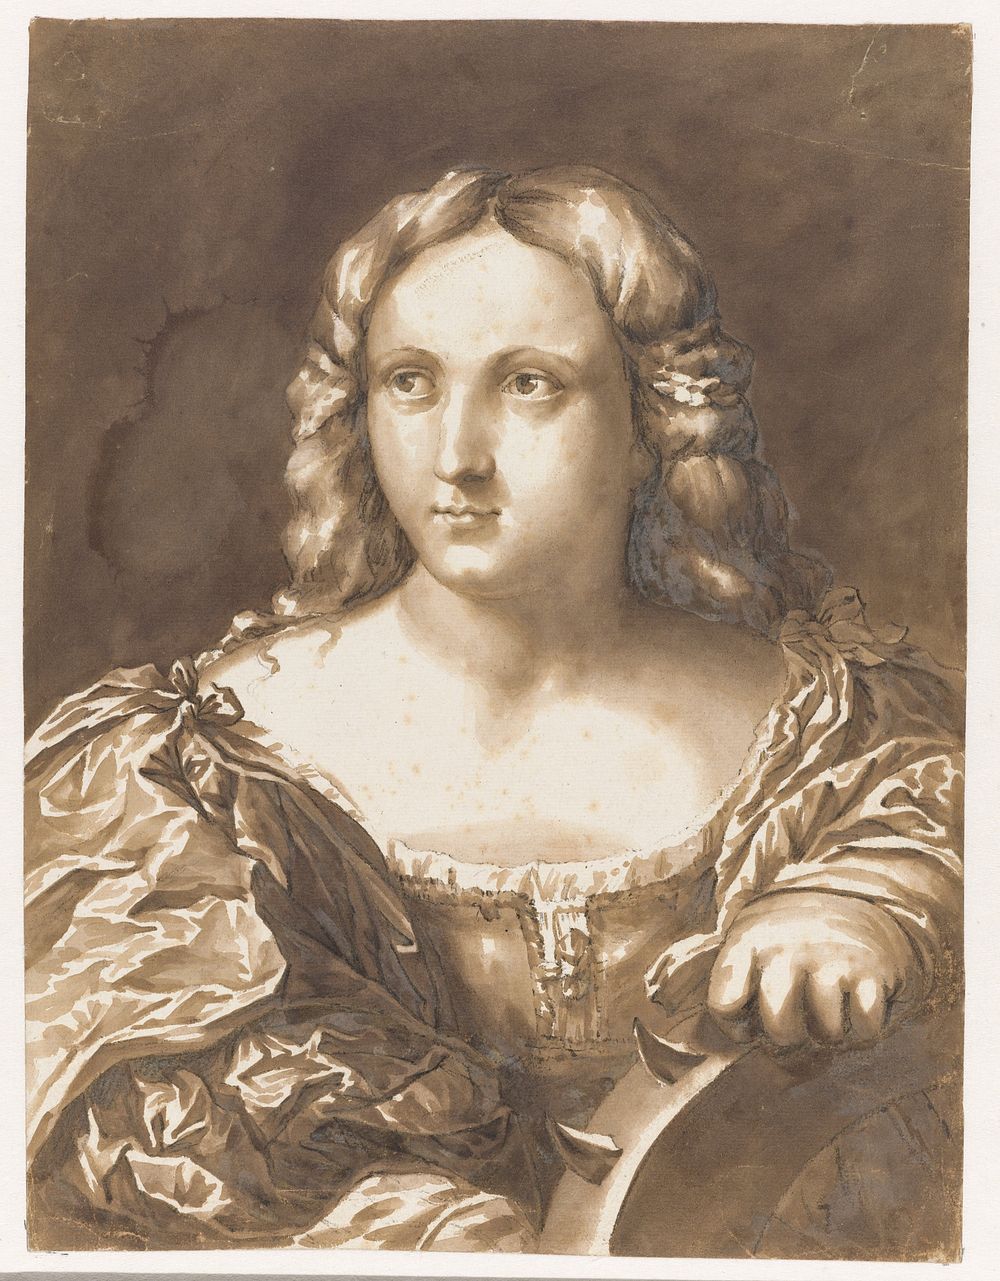 Heilige Catharina (1648 - 1671) by Jan de Bisschop and Jacopo Palma